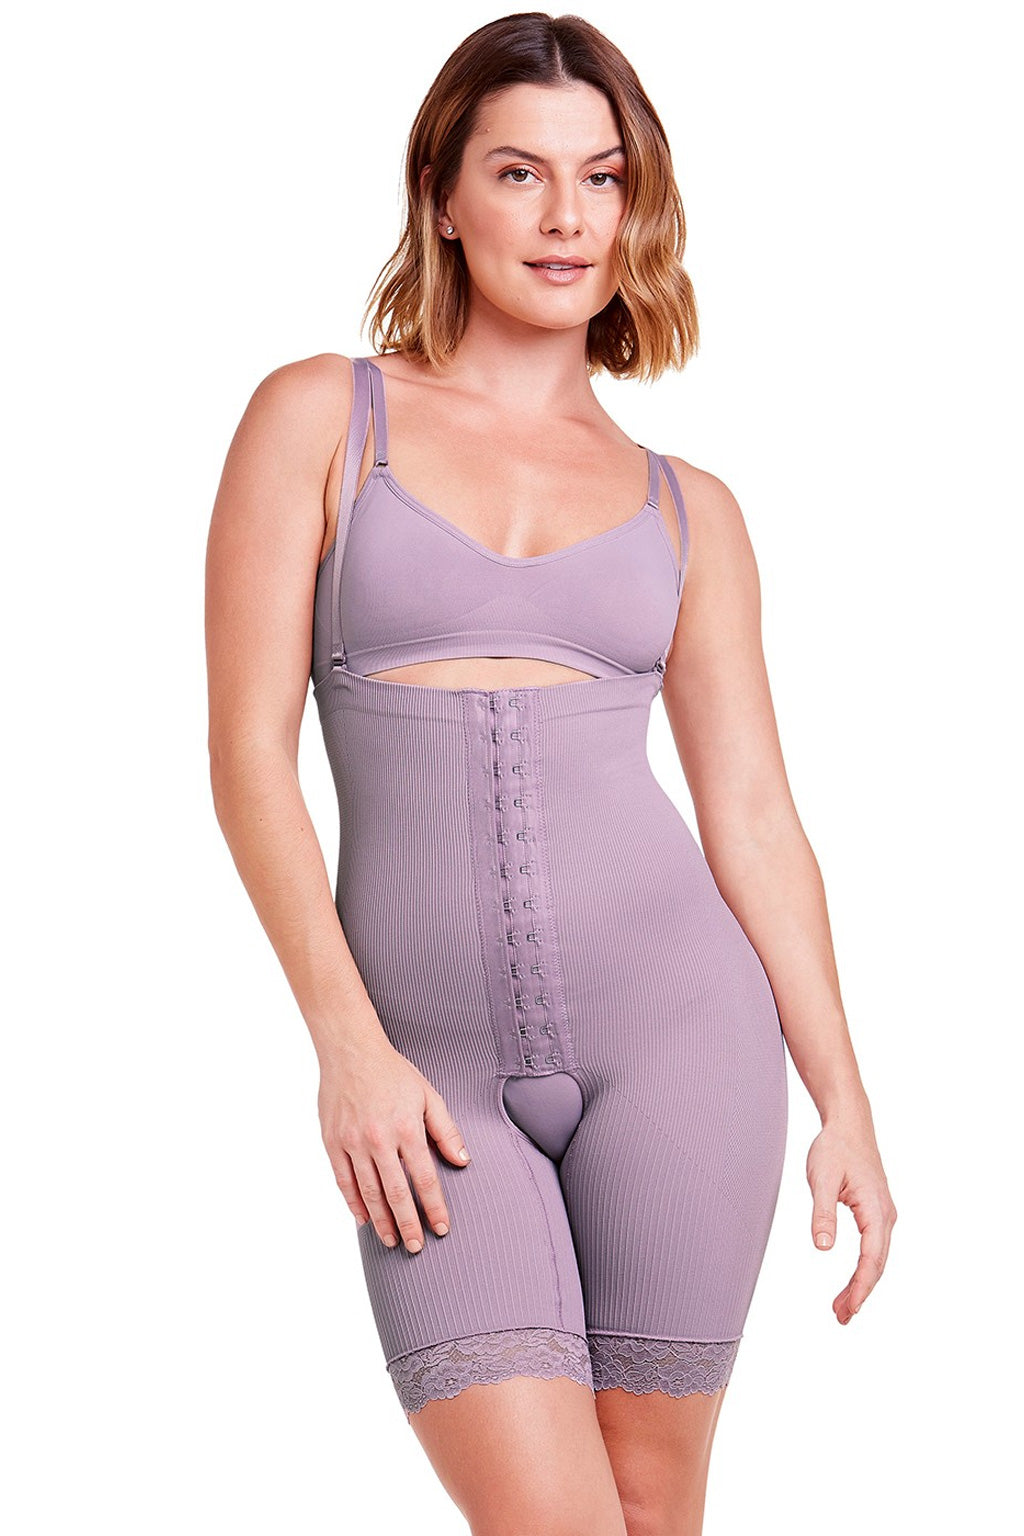 Shapewear That Can Help Fight Cellulite?